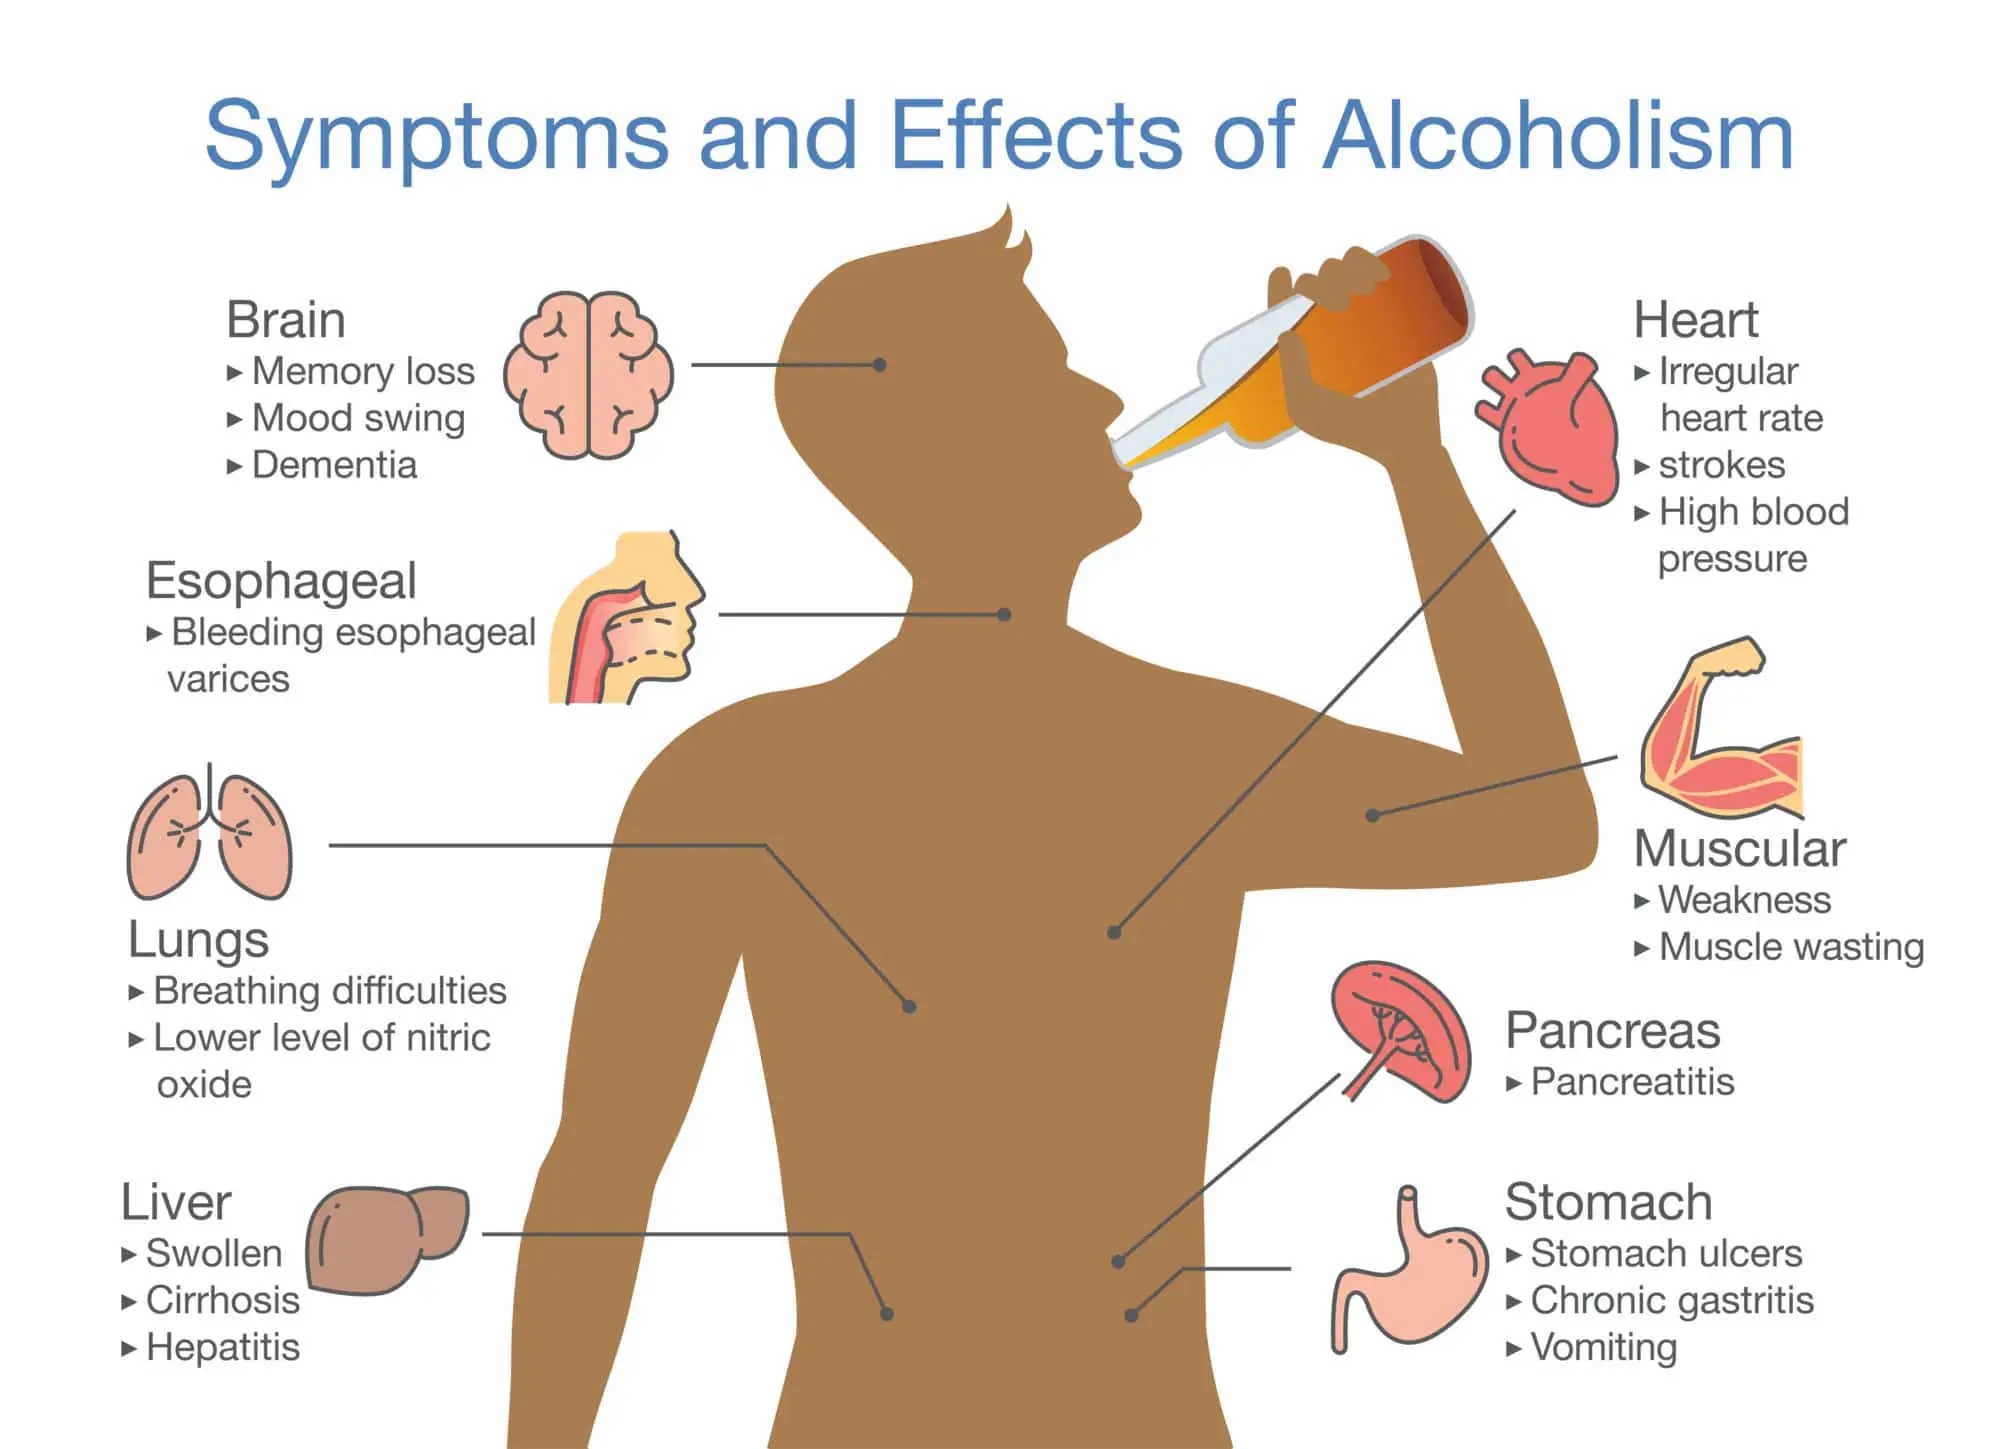 The Long Term Effects of Alcohol Abuse Can Be Devastating